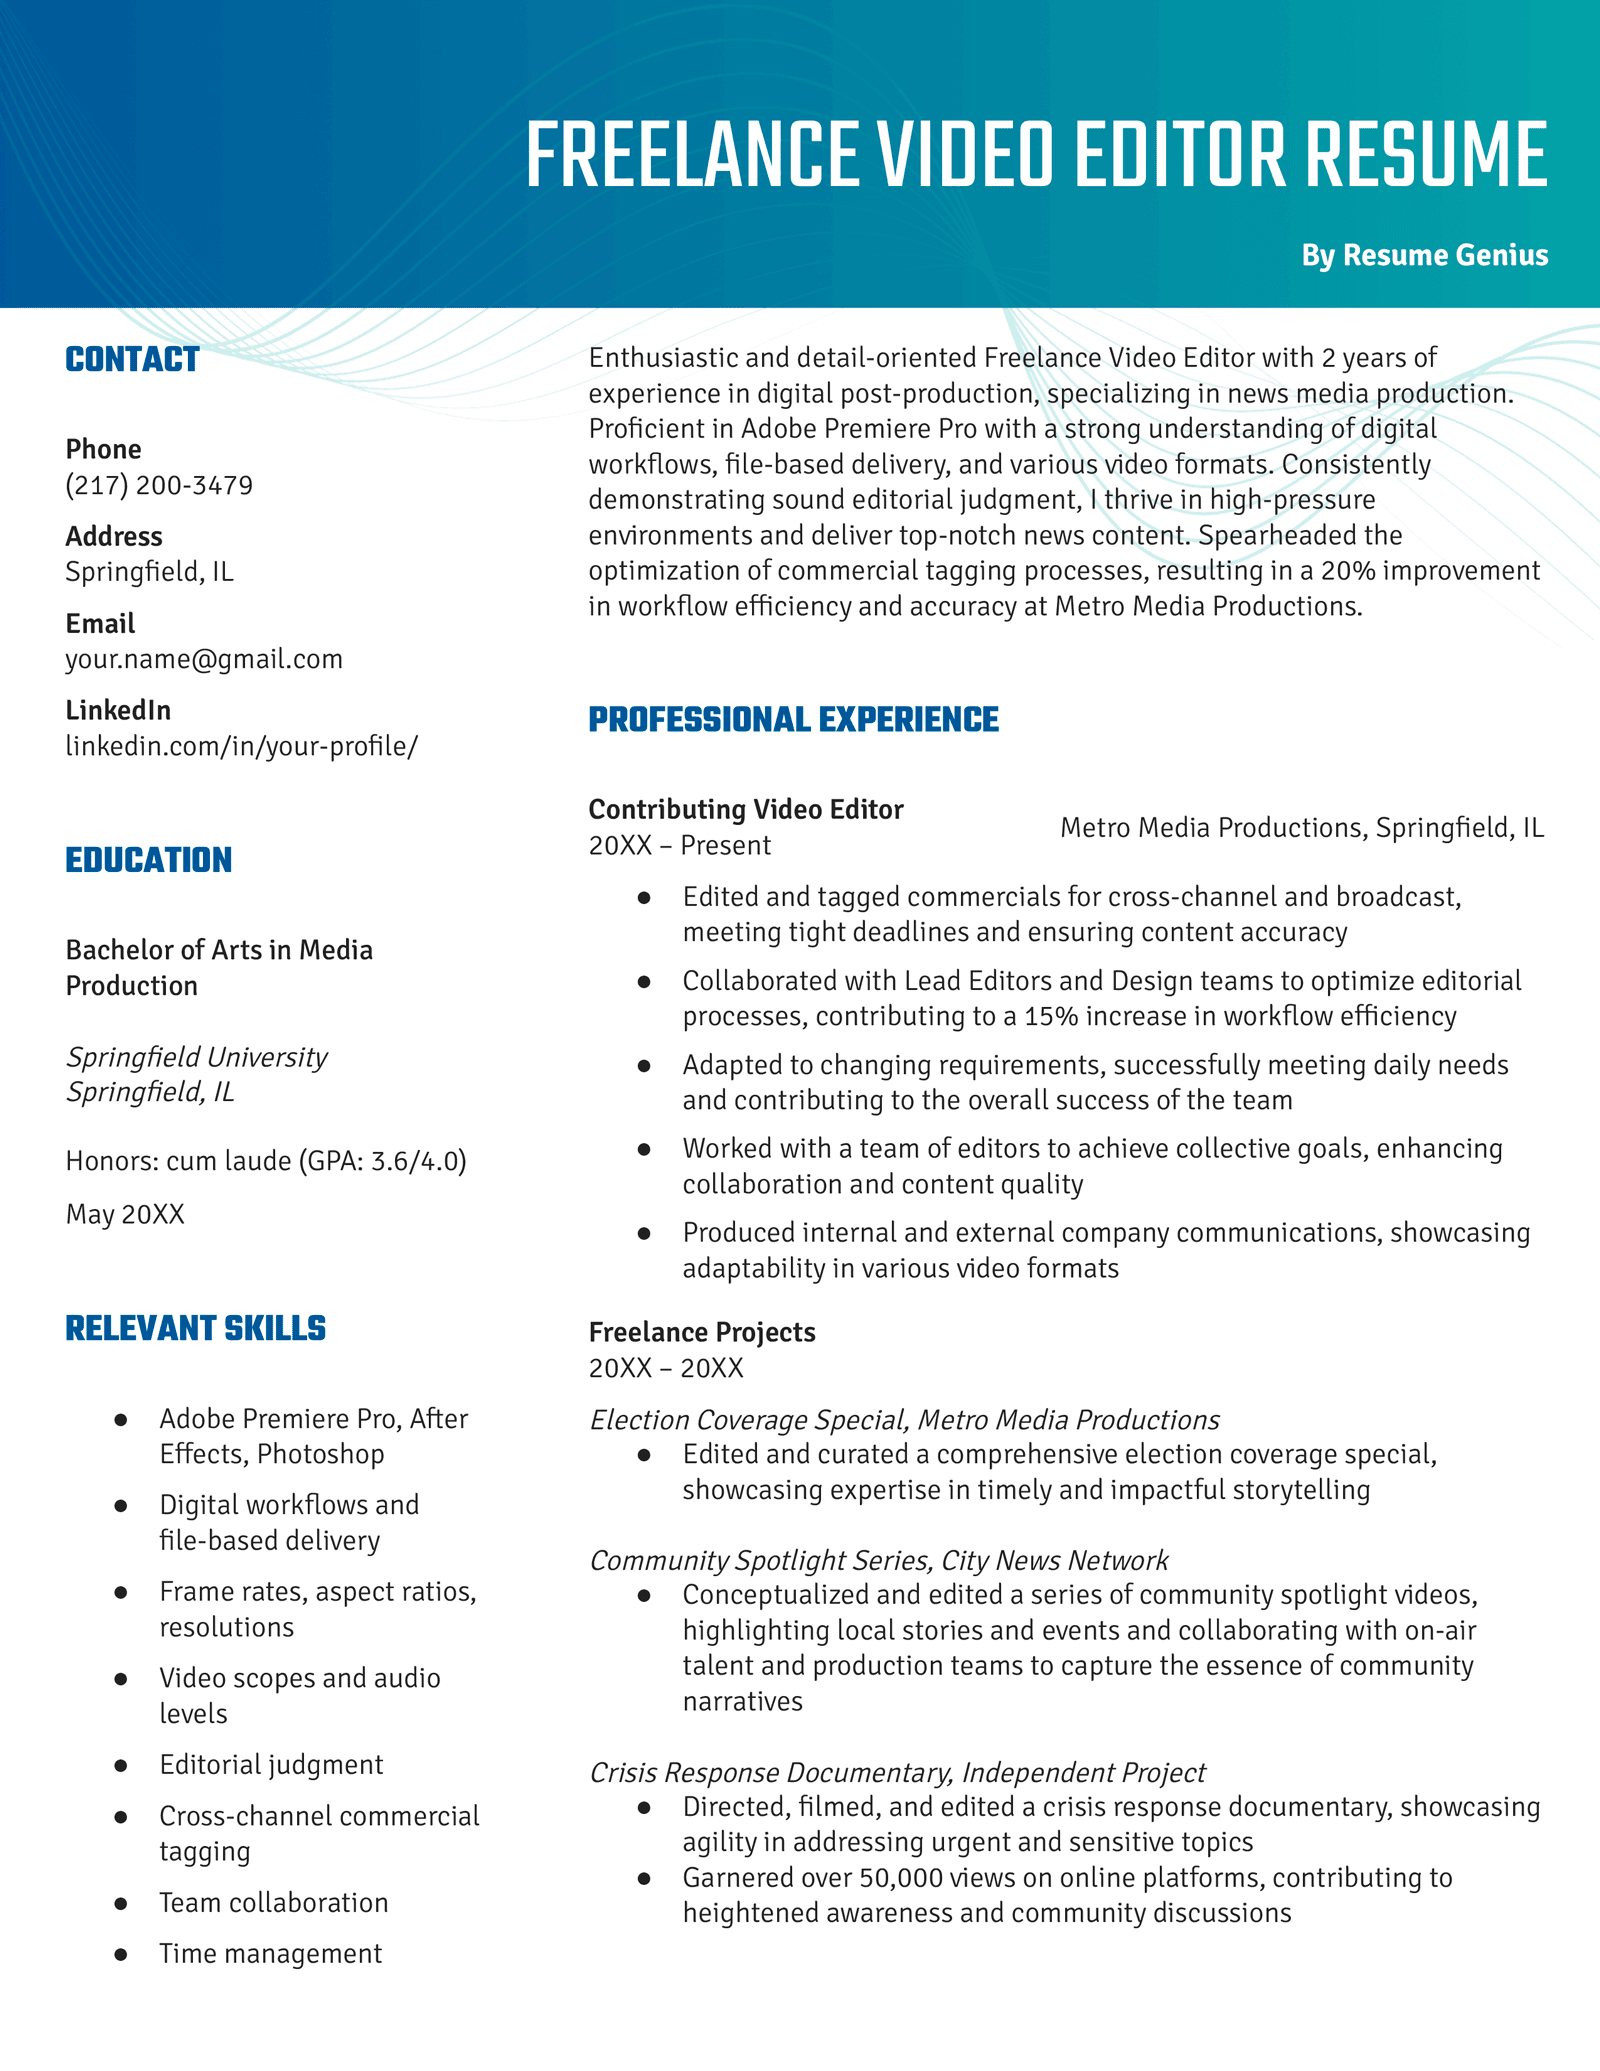 Freelance video editor resume that uses the Aesthetic template in turquoise.